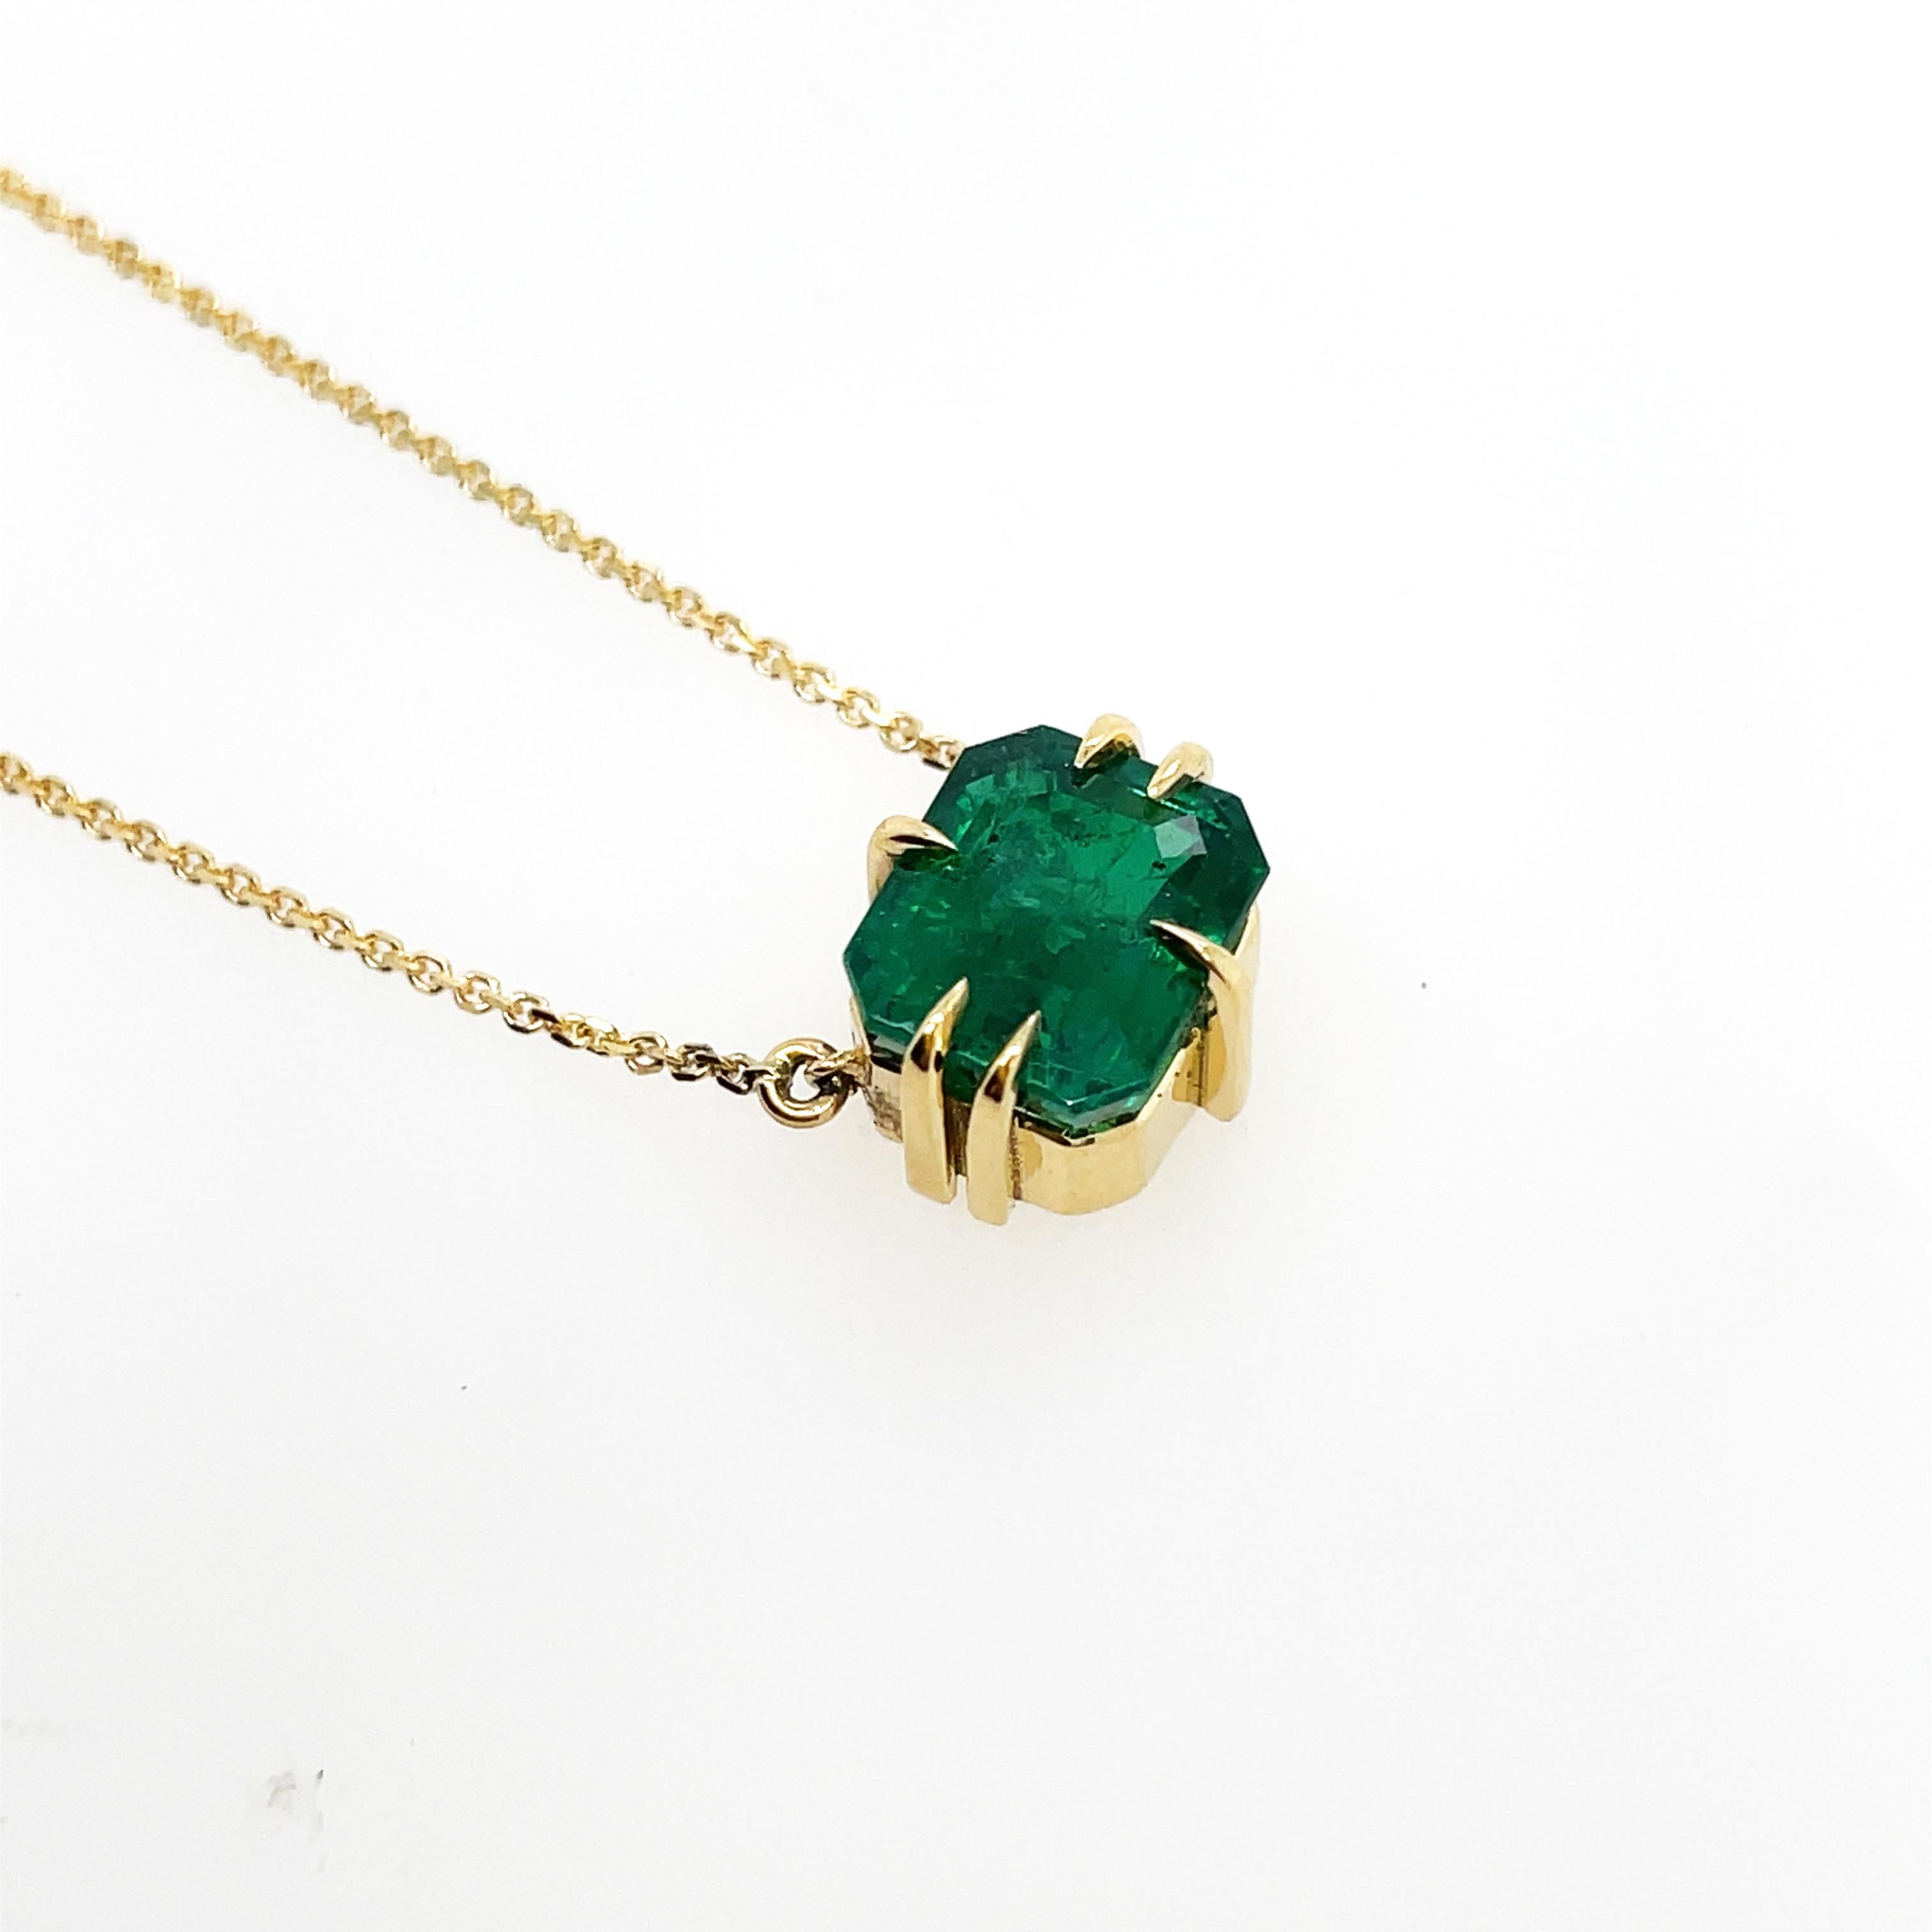 
2.26ct Lustrous forest green Emerald cut Emerald set in fierce claws in 18ct yellow gold with 42cm 18ct yellow gold chain.

Zambian emerald
Emerald cut
18k gold
42cm 18k chain
Ohliguer signature claws
Ready to ship in gift box
Comes with